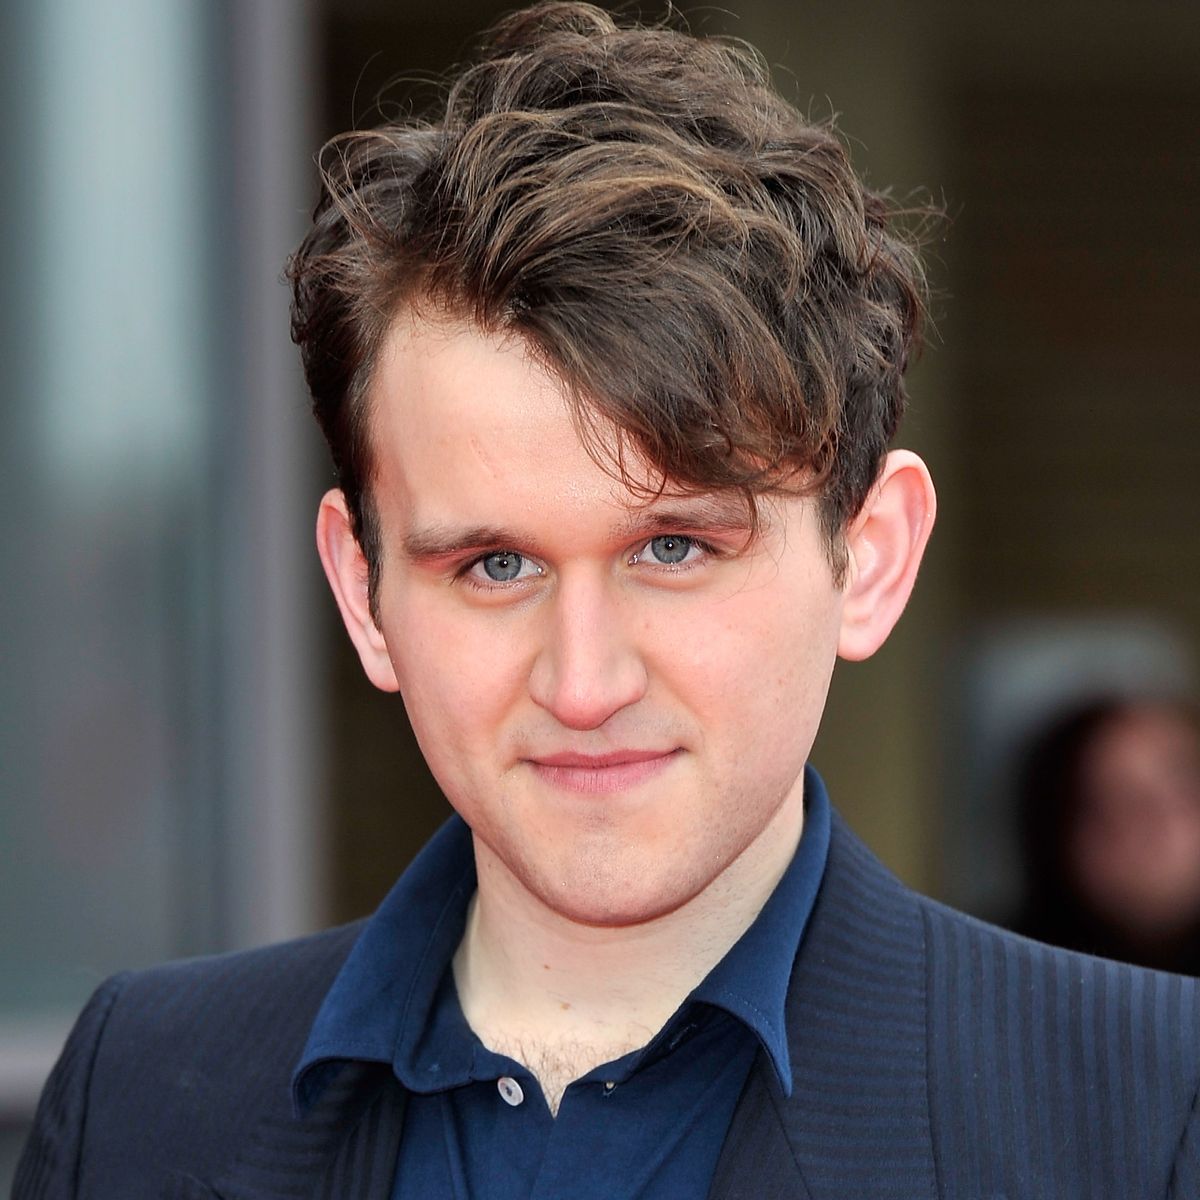 Who played Dudley Dursley in the Harry Potter films? 2